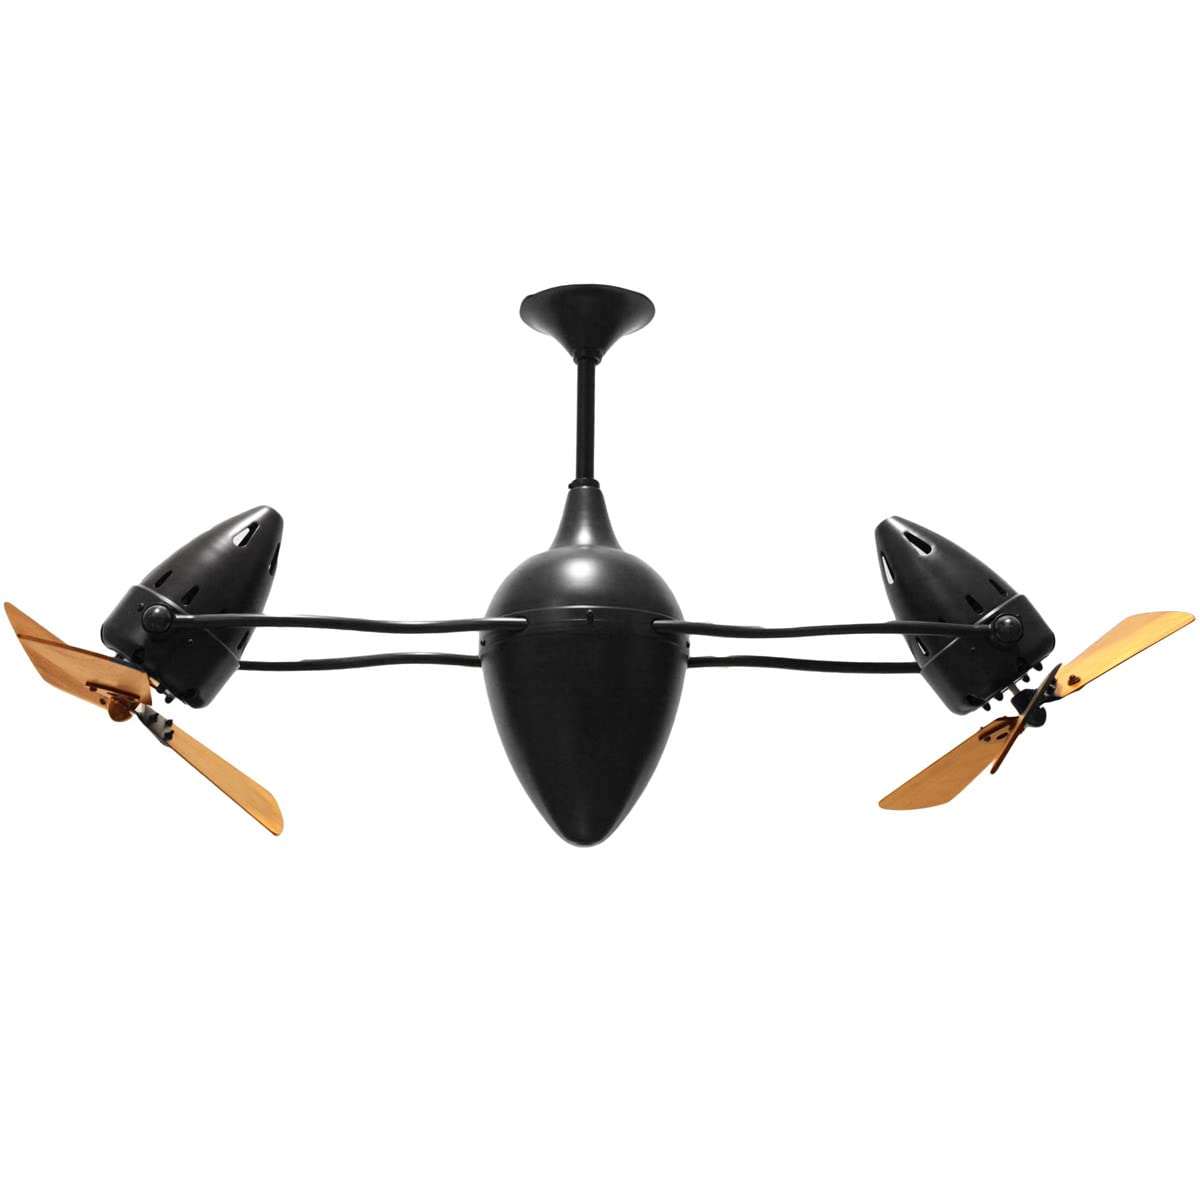 Matthews Fan AR-BK-WD Ar Ruthiane 360° dual headed rotational ceiling fan in Matte Black finish with solid sustainable mahogany wood blades.